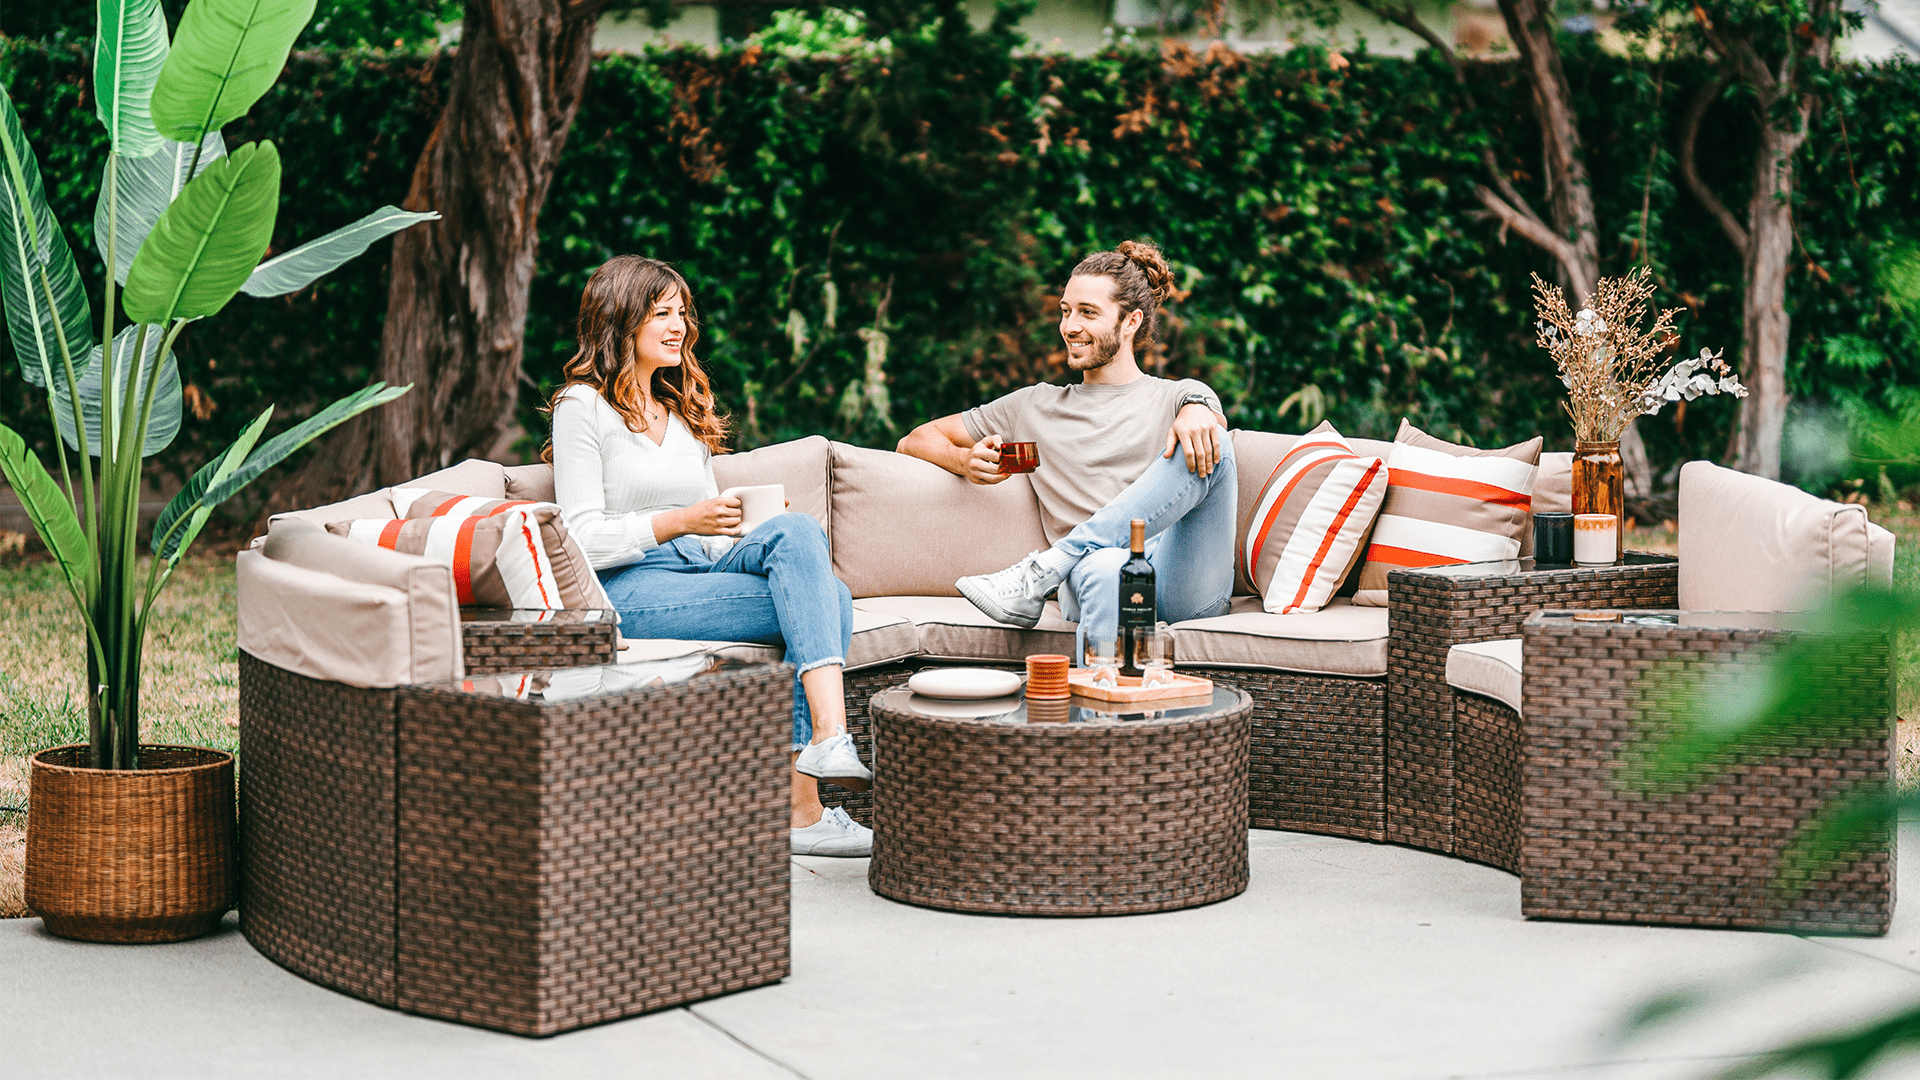 Orange-Casual Announces Cost-Effective and High-Quality Outdoor Furniture